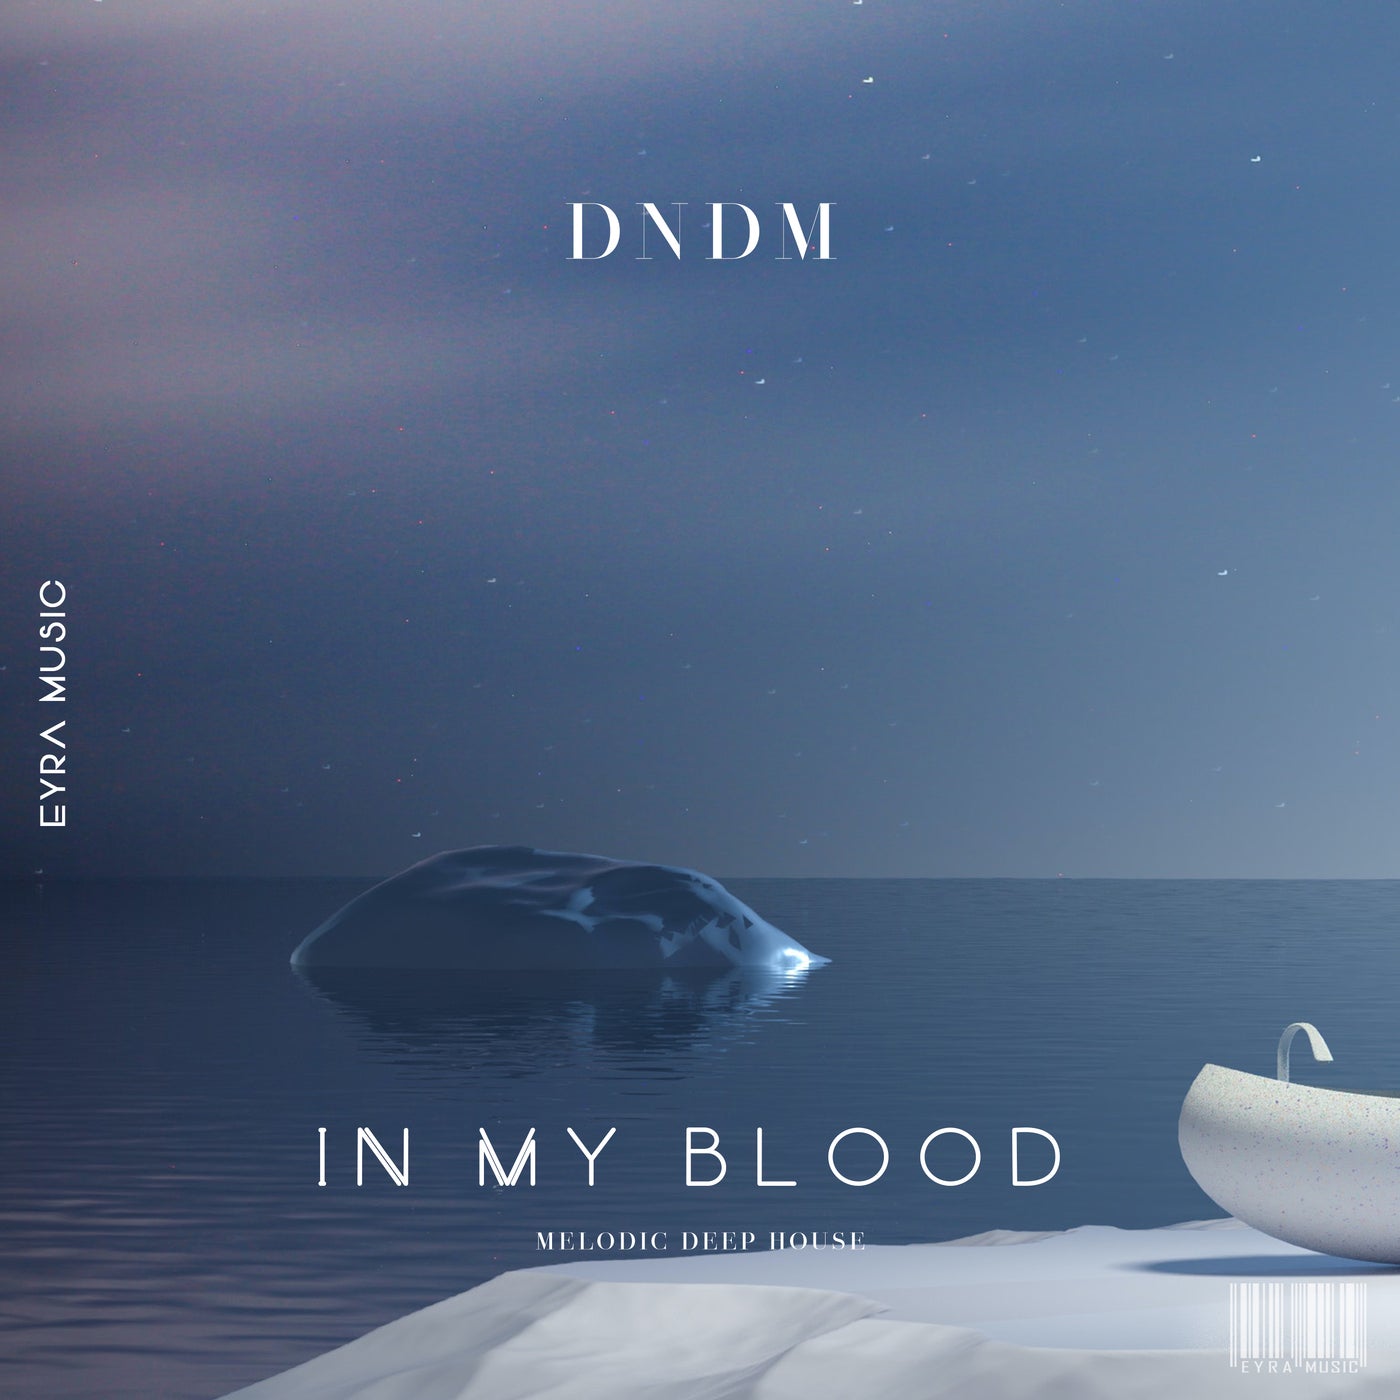 hay canal Thank In My Blood (Original Mix) by DNDM on Beatport